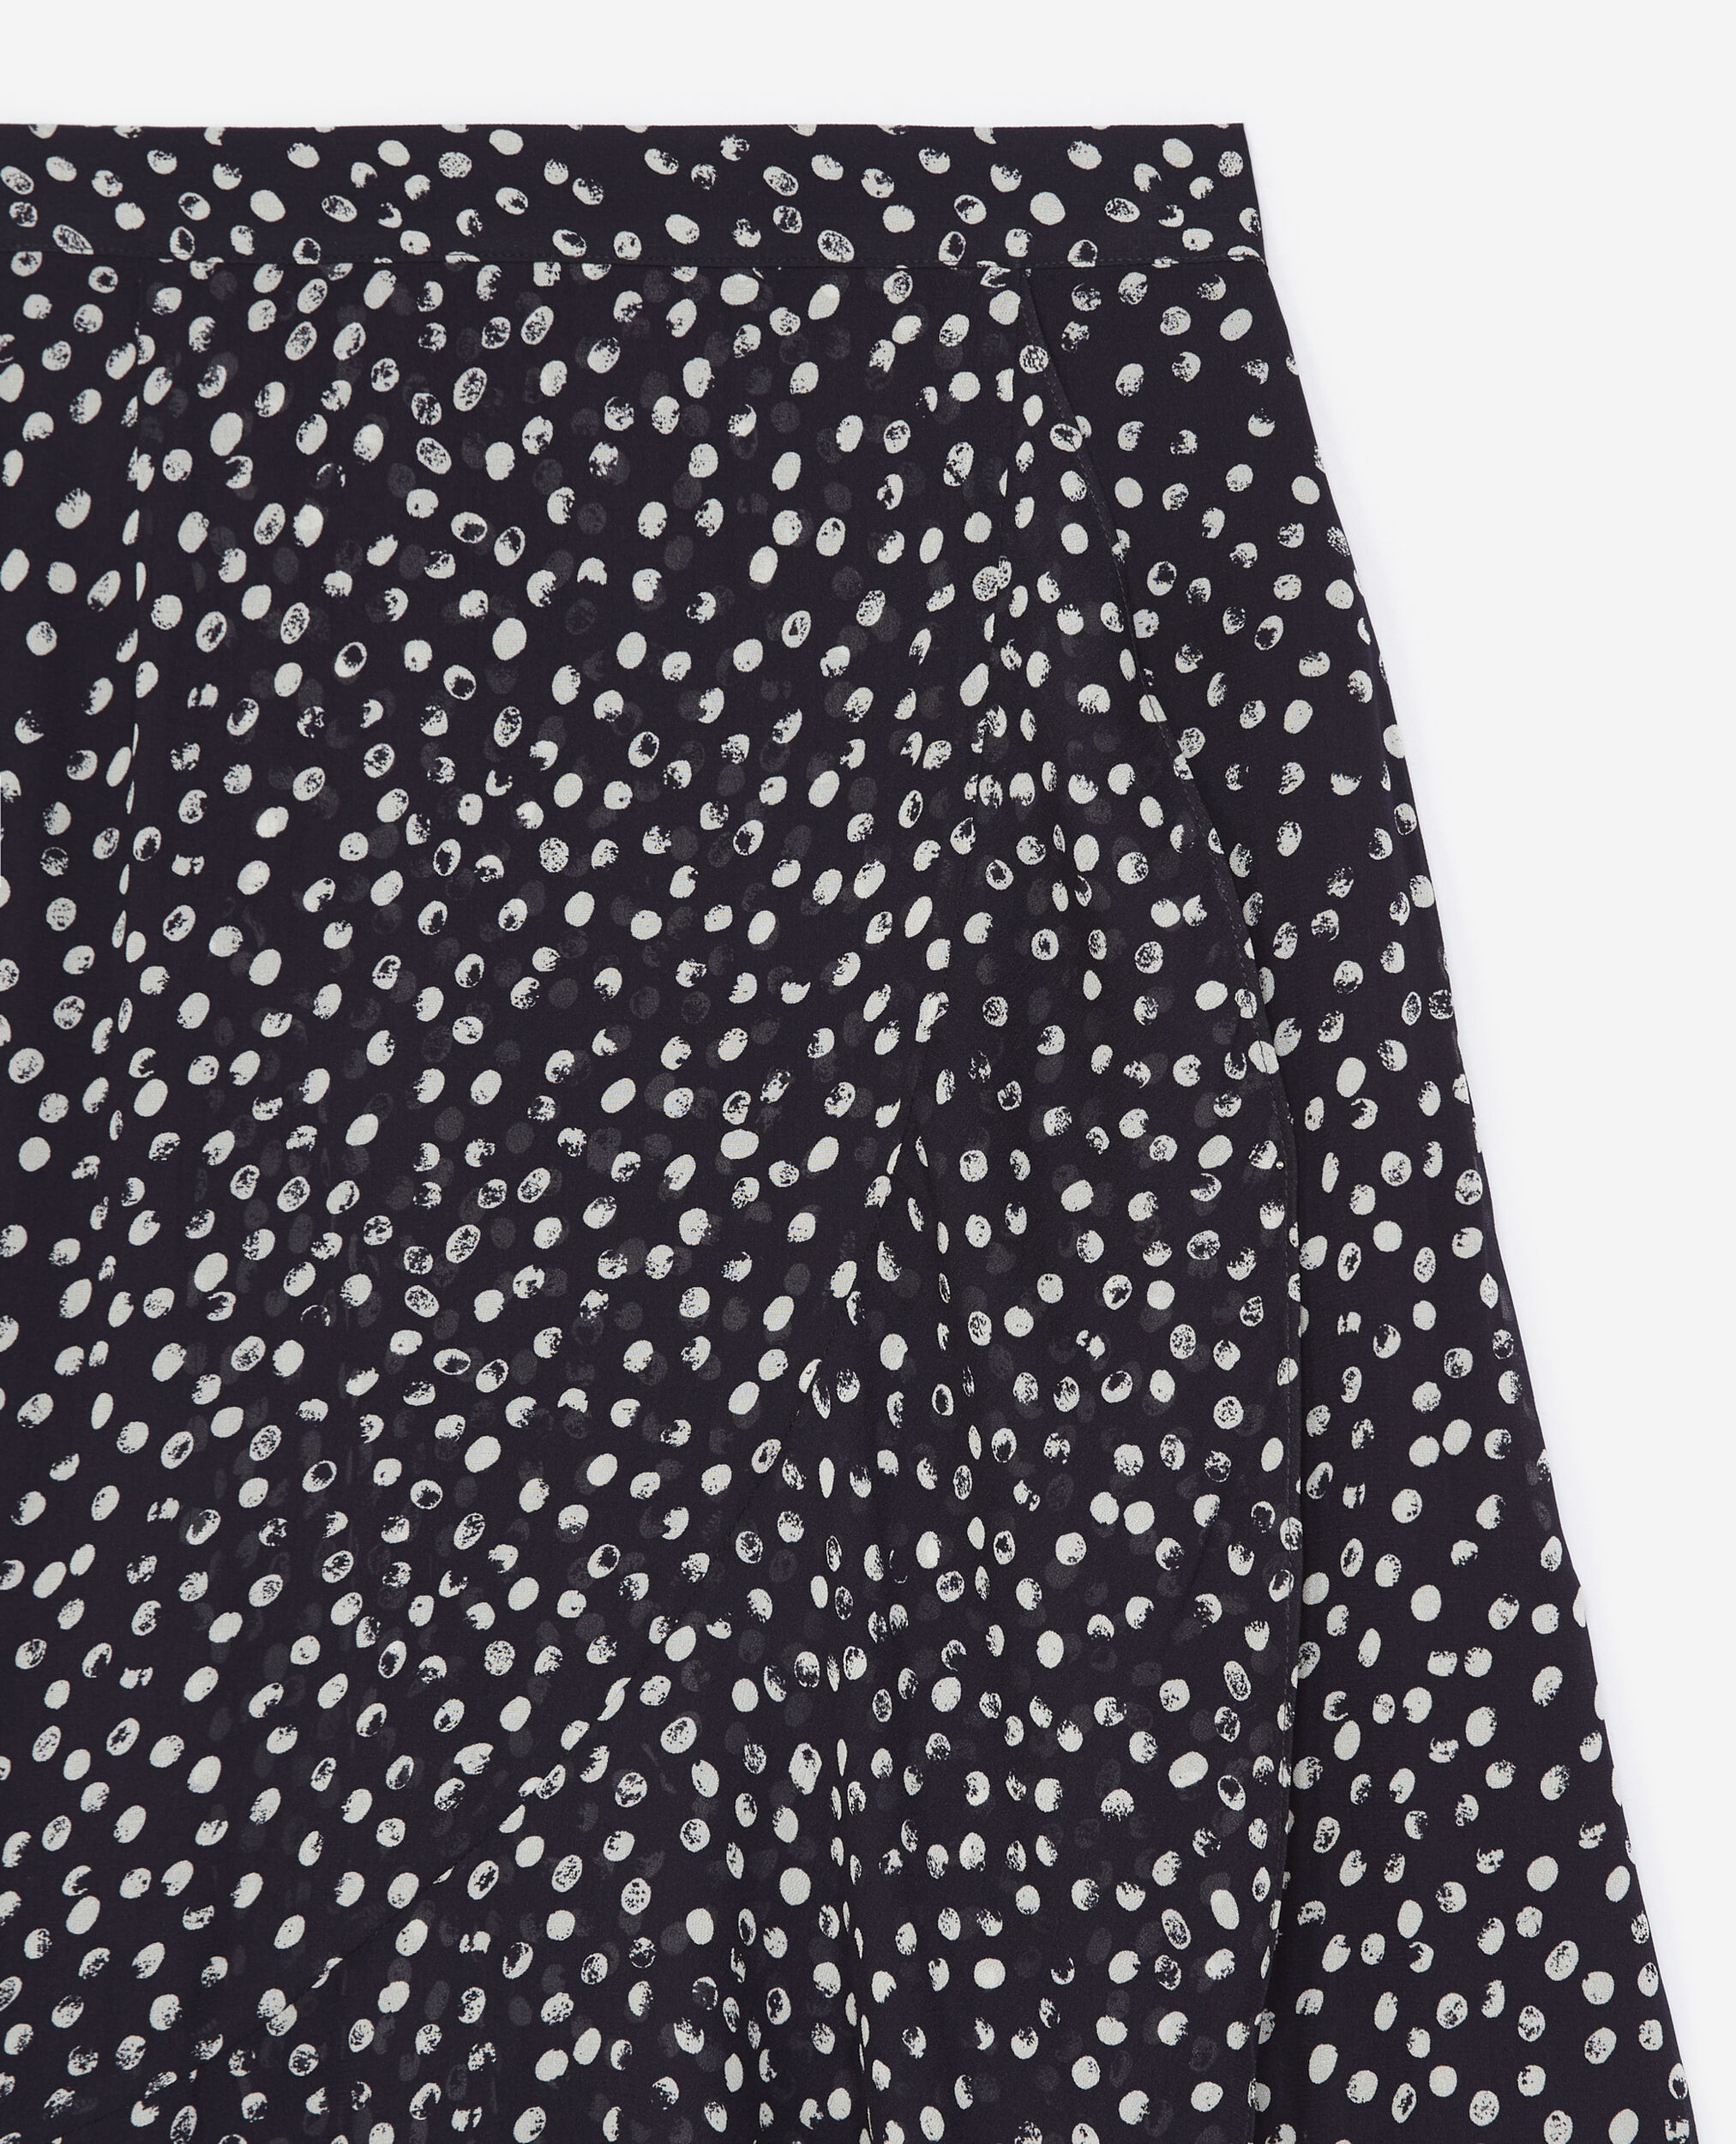 Long flowing navy blue skirt with polka dots, NAVY / WHITE, hi-res image number null